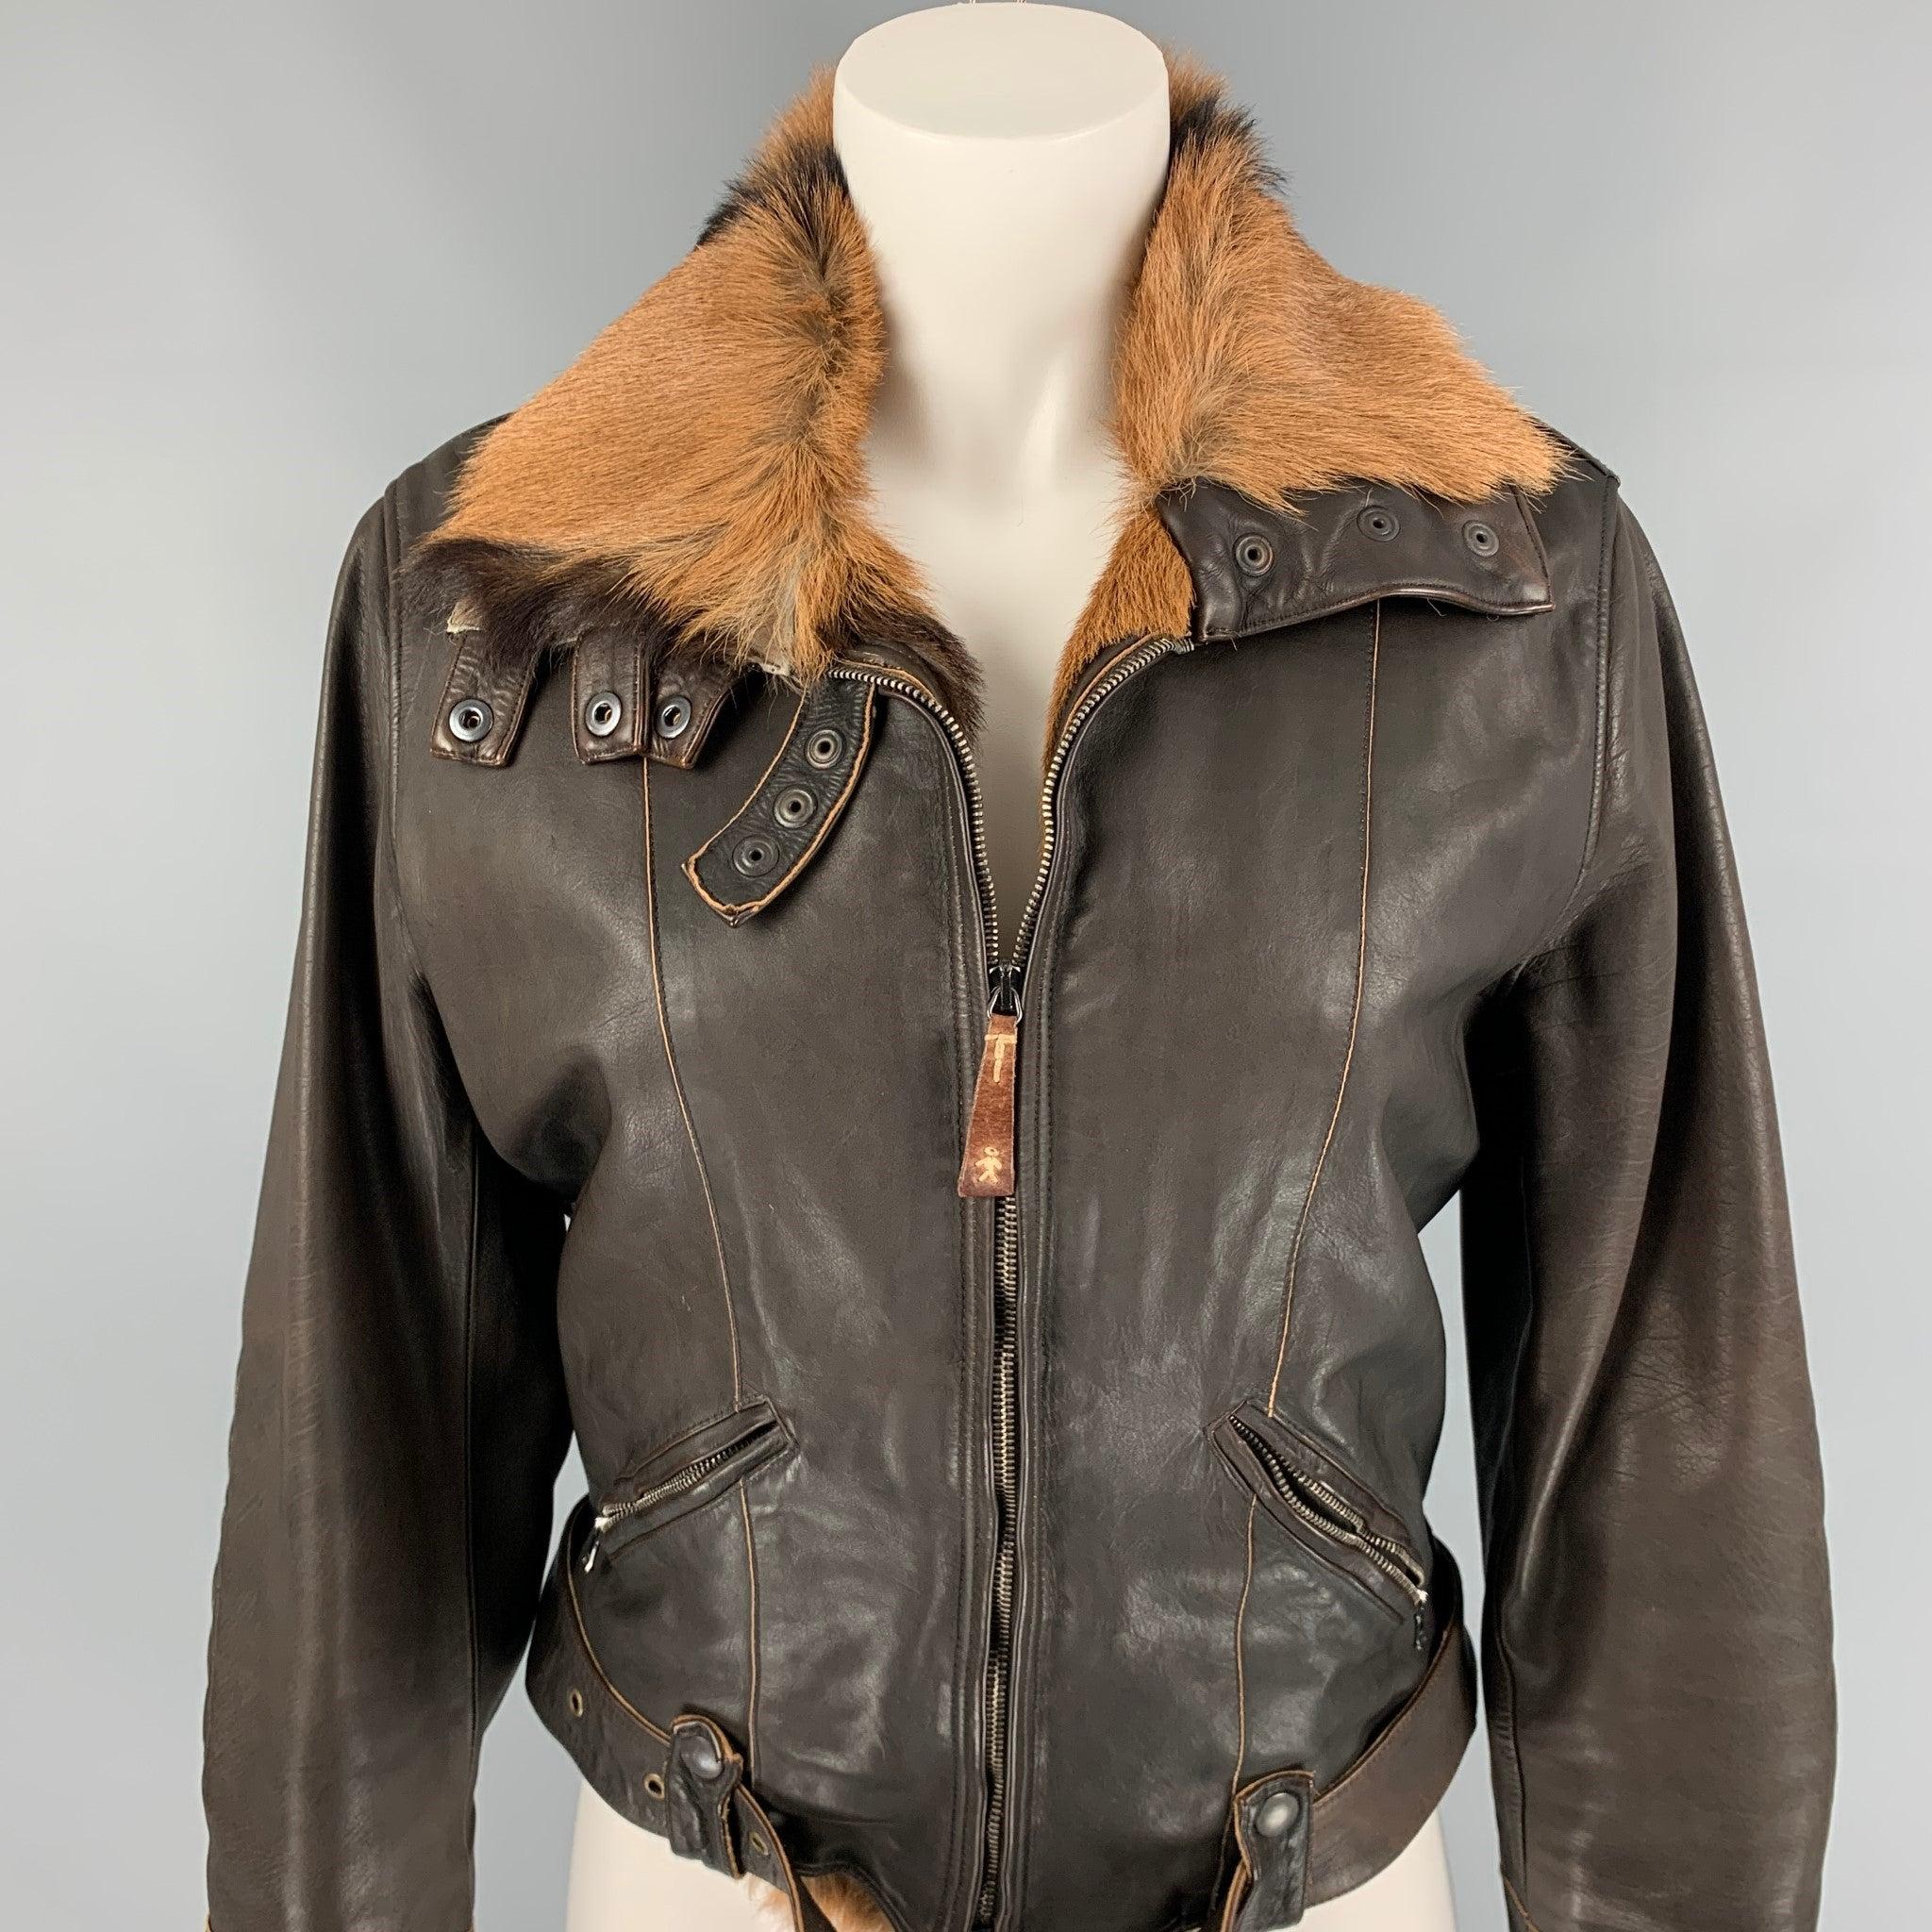 HENRY BEGUELIN jacket comes in a brown & tan chamois leather featuring a motorcycle style, fur collar, quilted elbow patches, zipper pockets, snap button details, and a zip up closure. Made in Italy.
Very Good
Pre-Owned Condition. 

Marked:   40